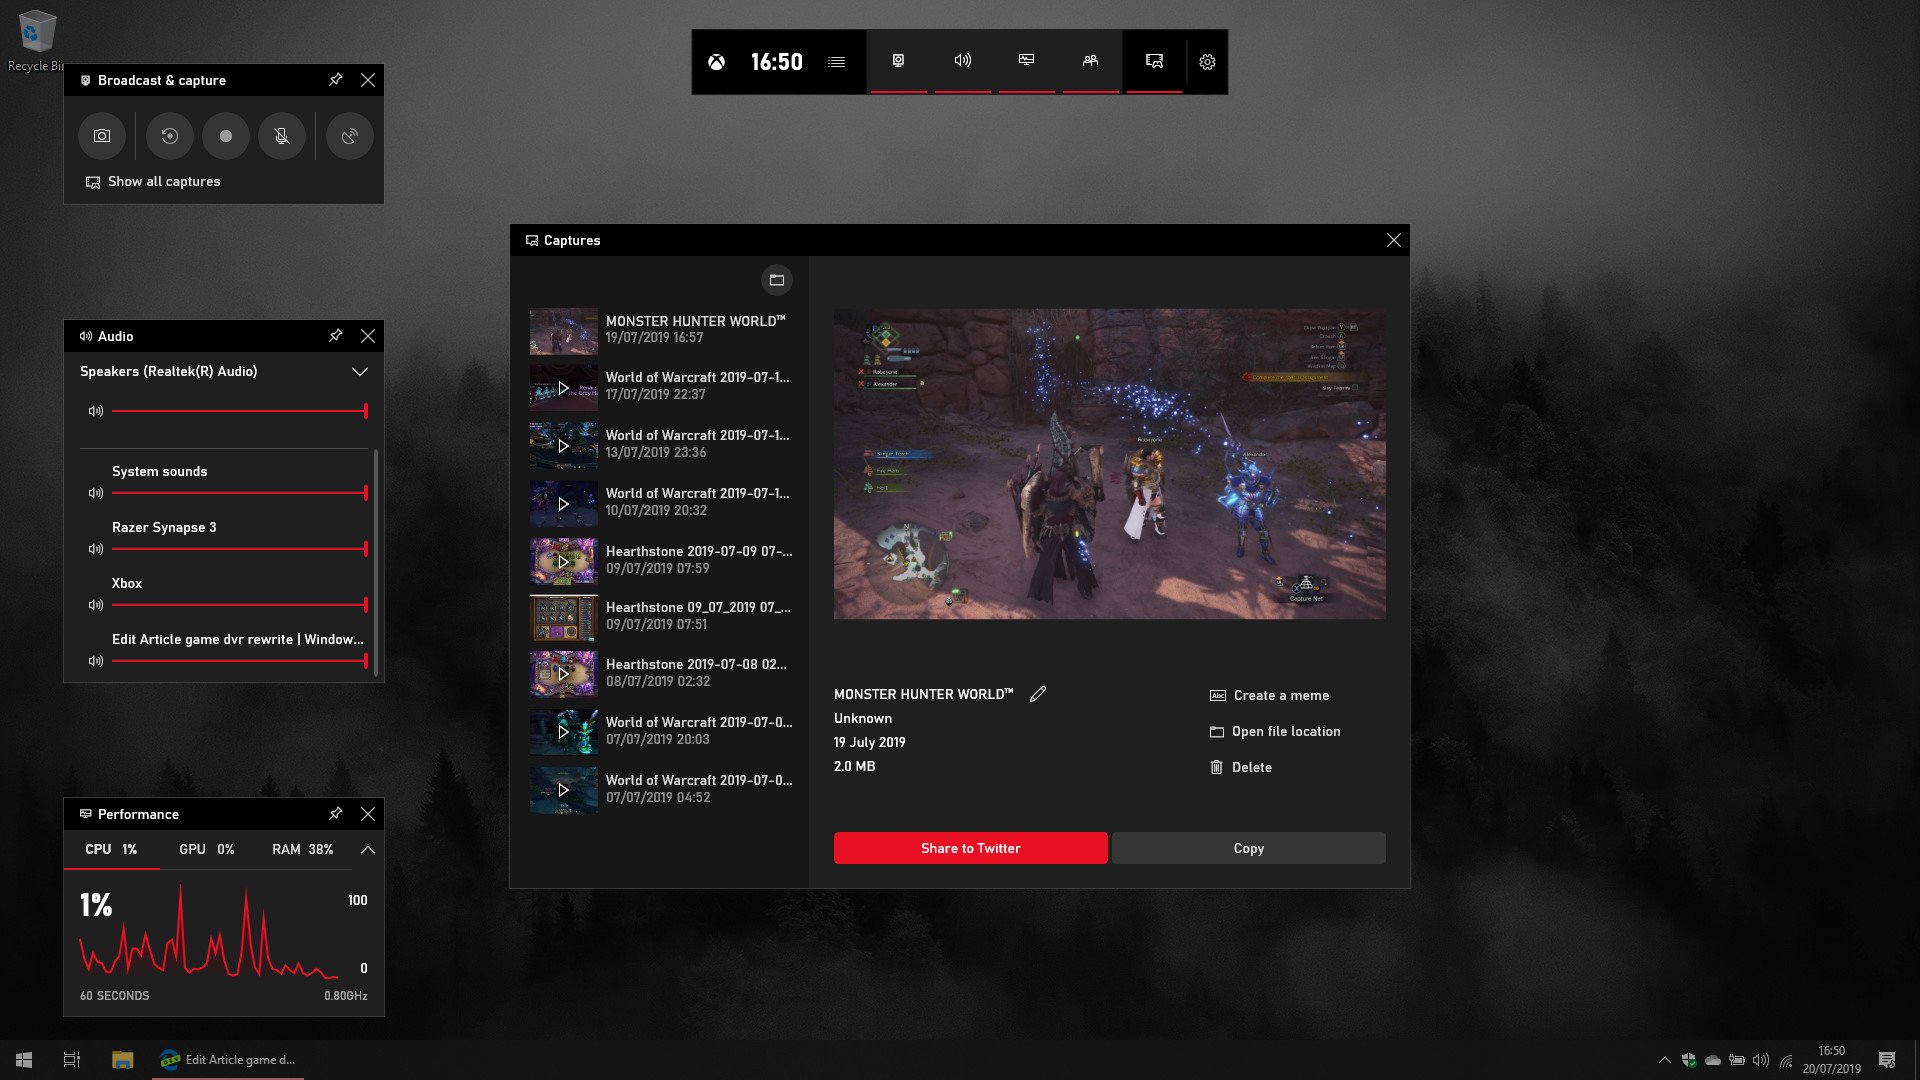 How To Use Game Dvr In The Windows 10 Xbox Game Bar App To Record